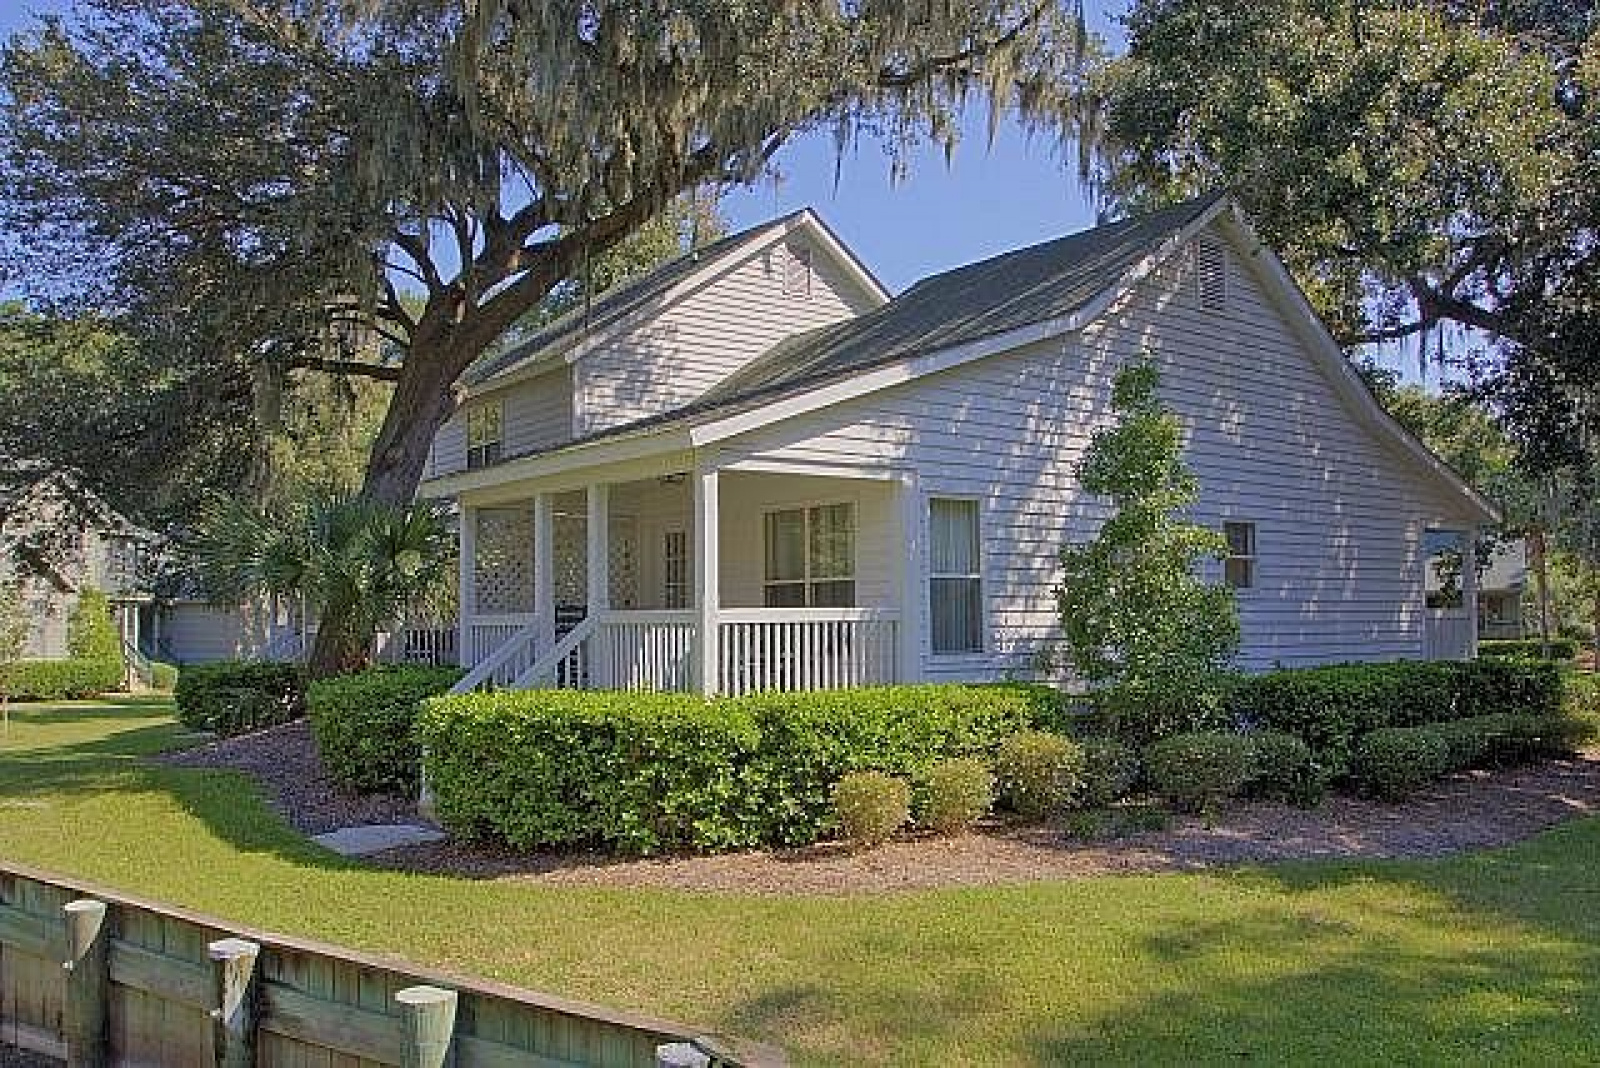 18 Valencia Rd, Hilton Head Island, South Carolina, ,Resorts (Great Deals),For Sale,The Cottages,Valencia,1351